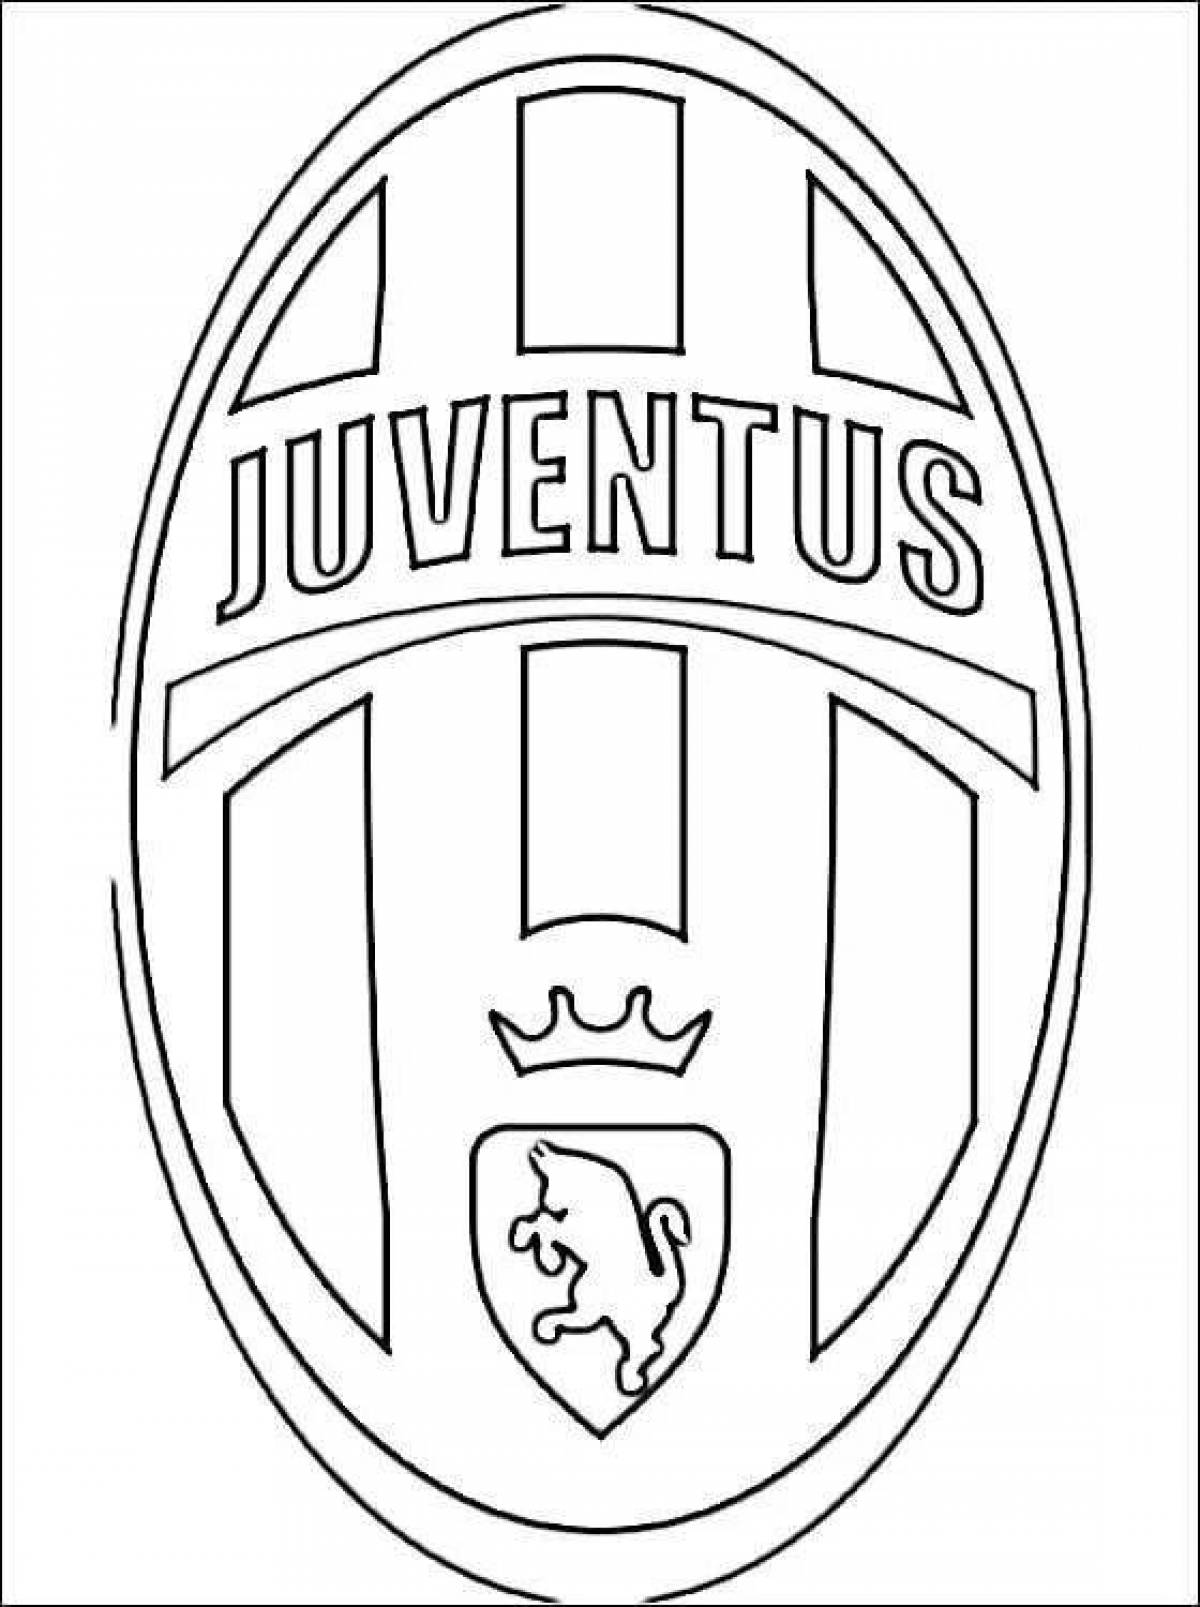 Sparkly coloring of the emblem of football clubs